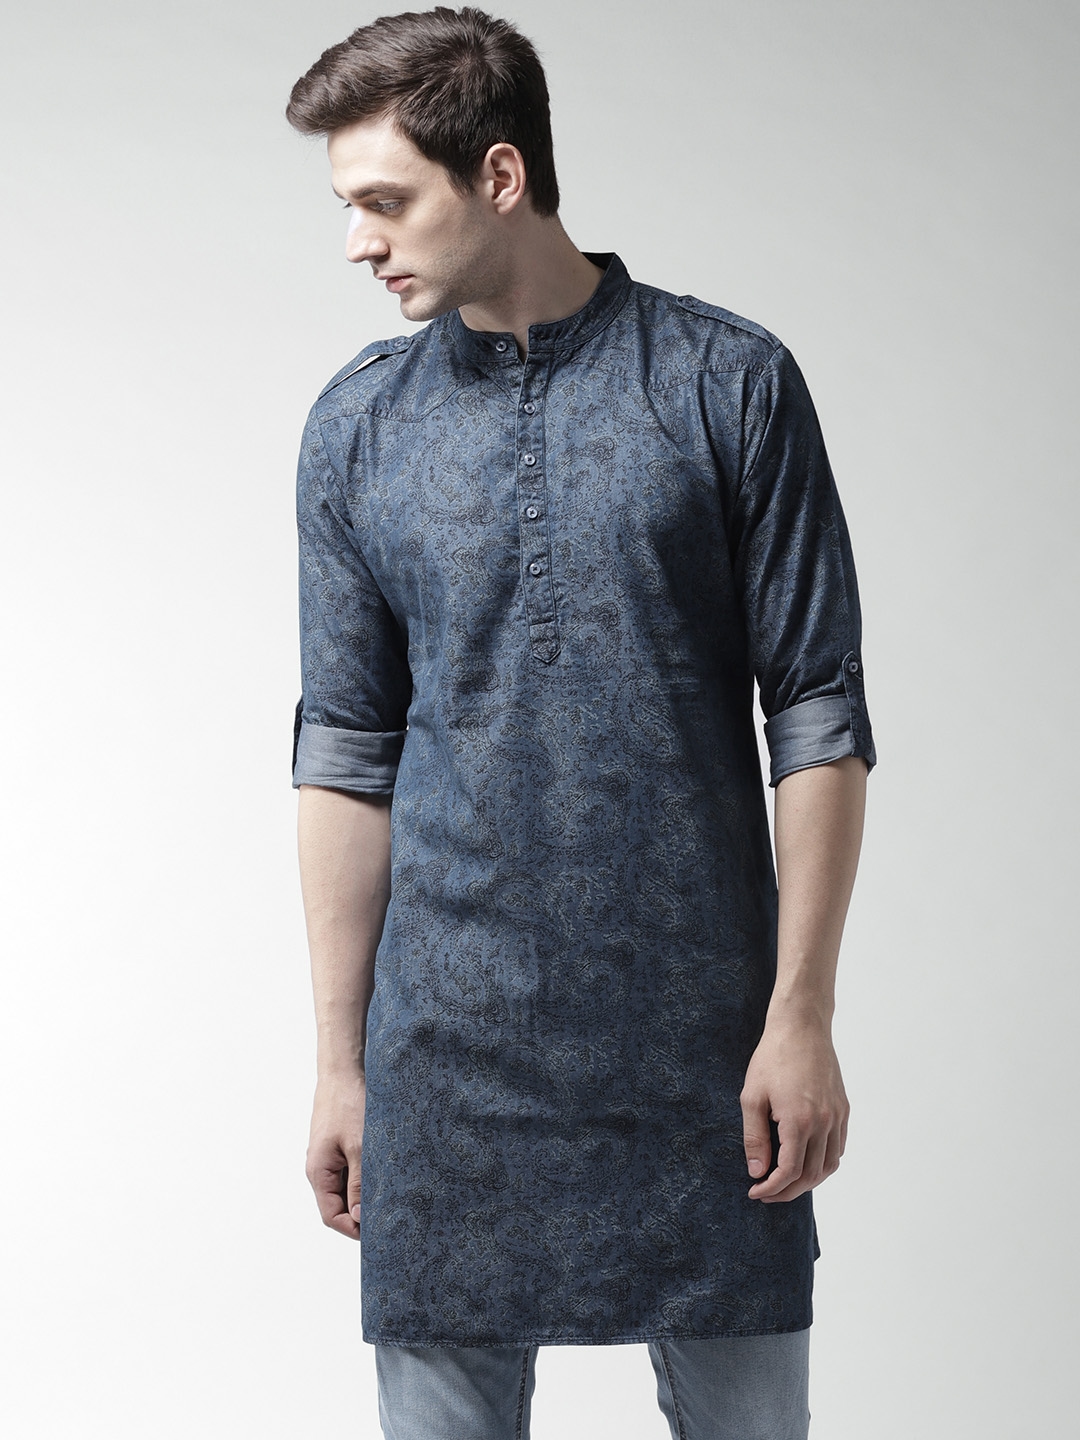 How to carry a kurta with jeans perfection - Quora-suu.vn